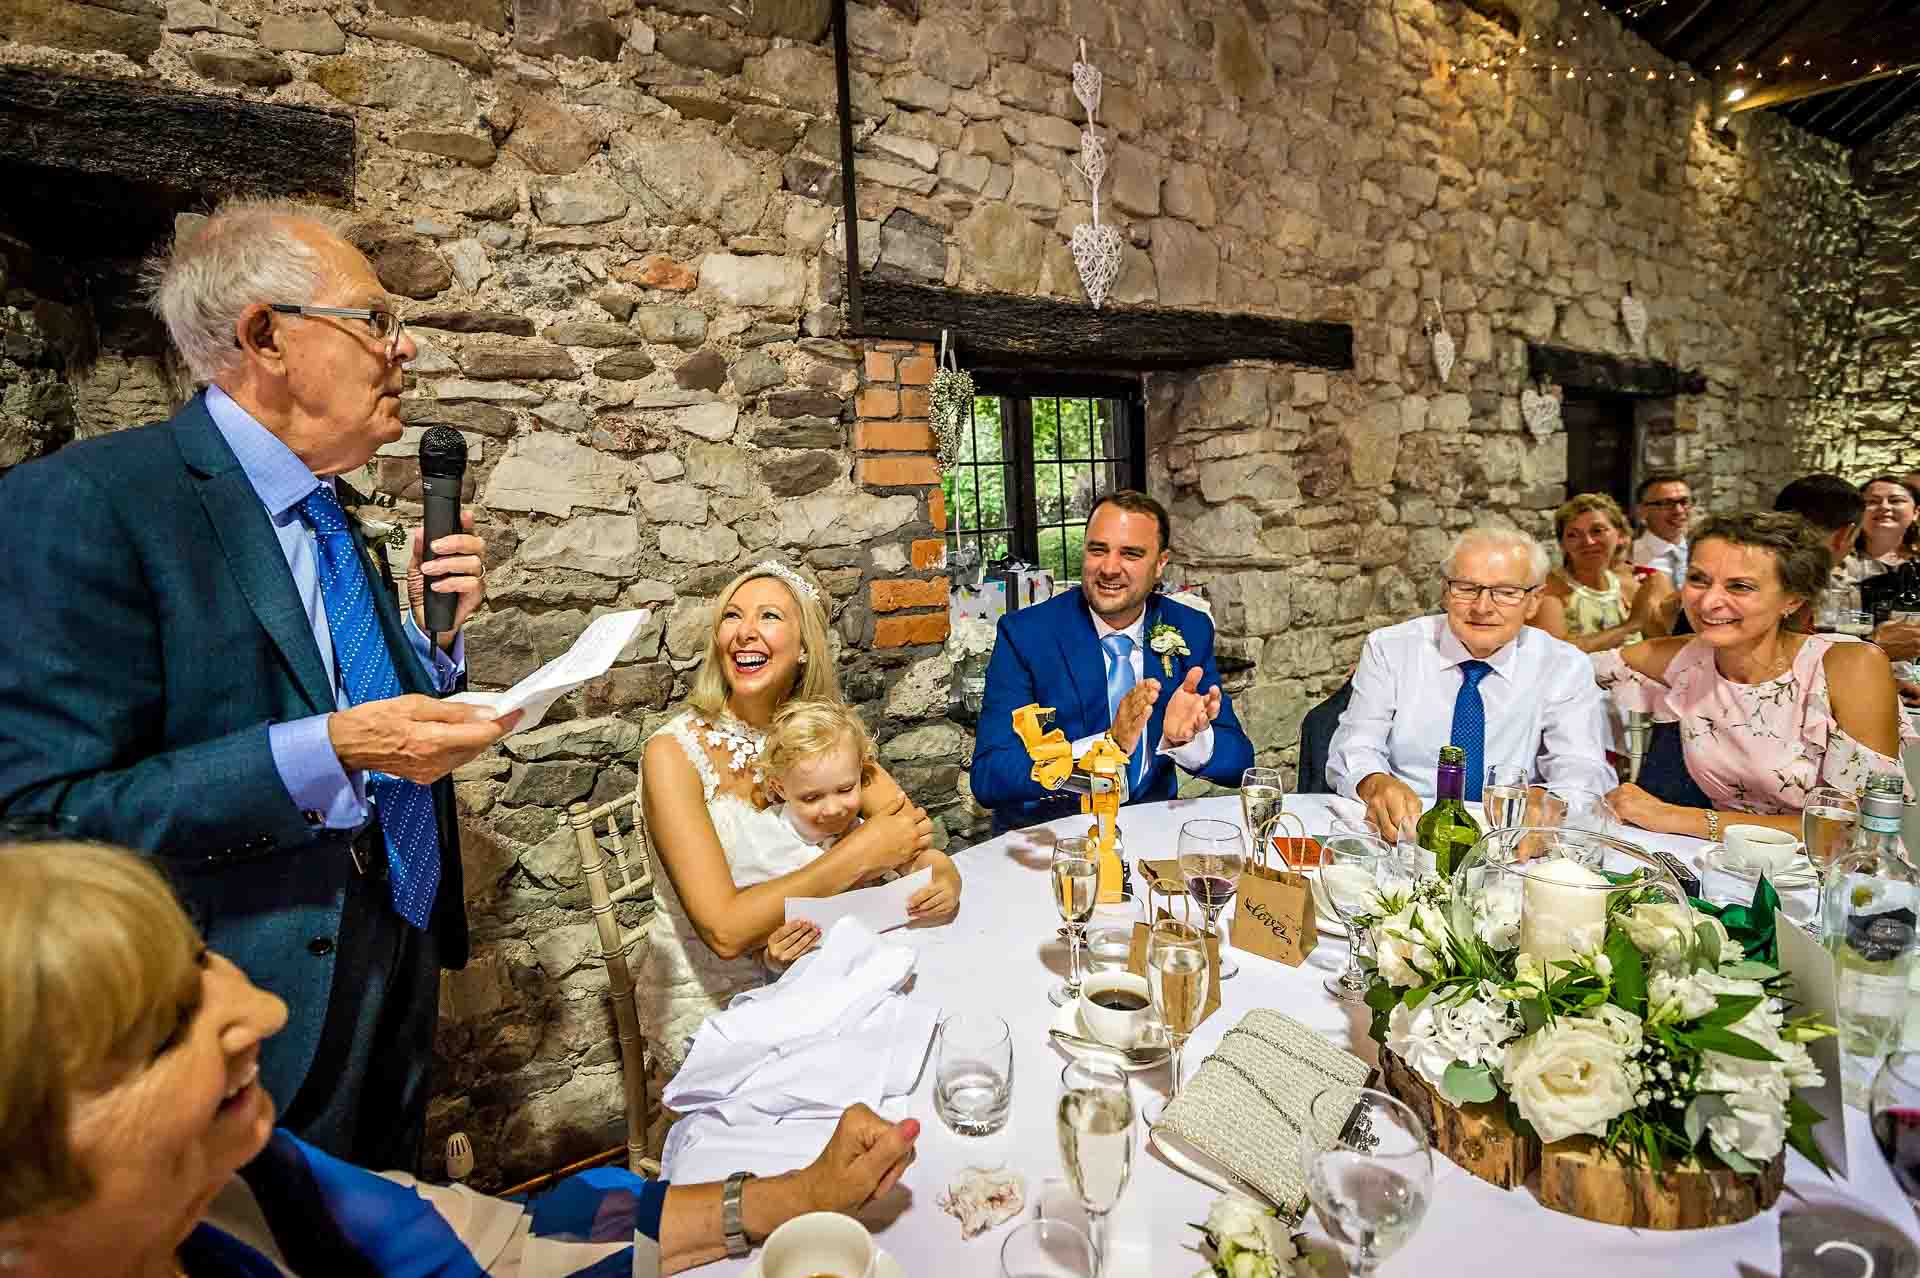 Father of the Bride Gives Speech at Wedding